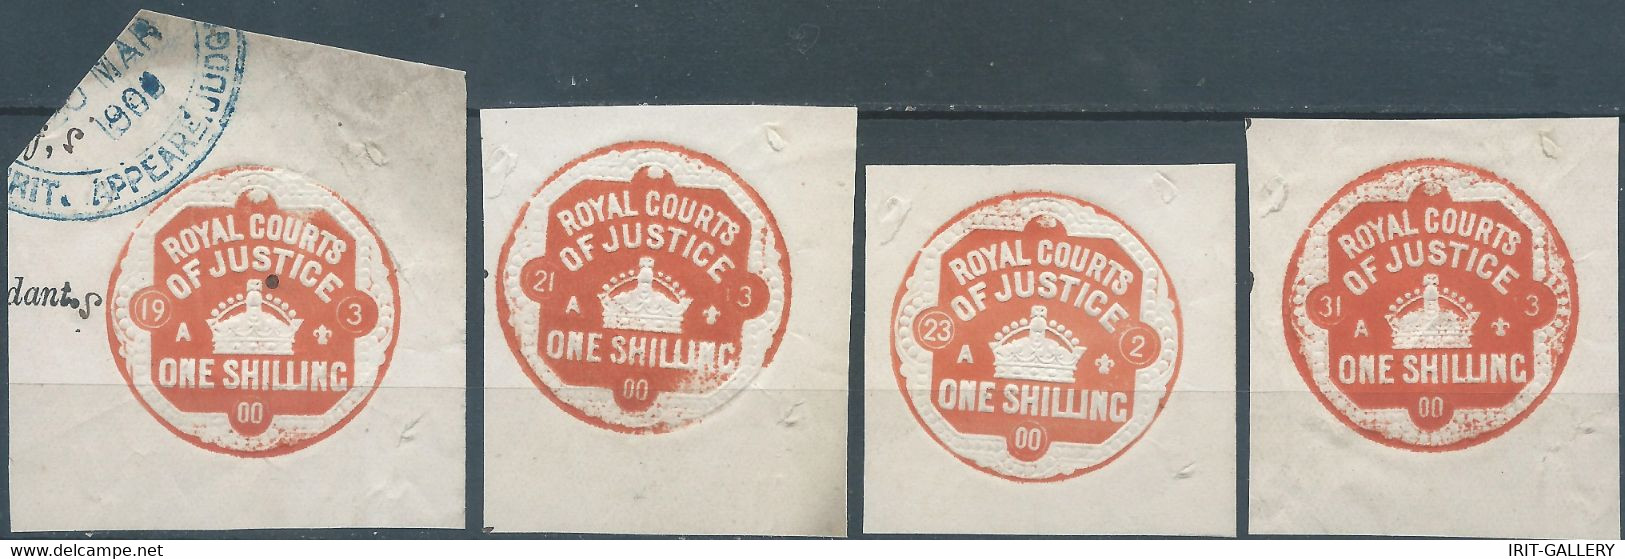 Great Britain-ENGLAND,1900 ,ROYAL COURTS OF JUSTICE, Tax Fee,Different Date Of The Day Of The Month,1 SHILLING - Steuermarken